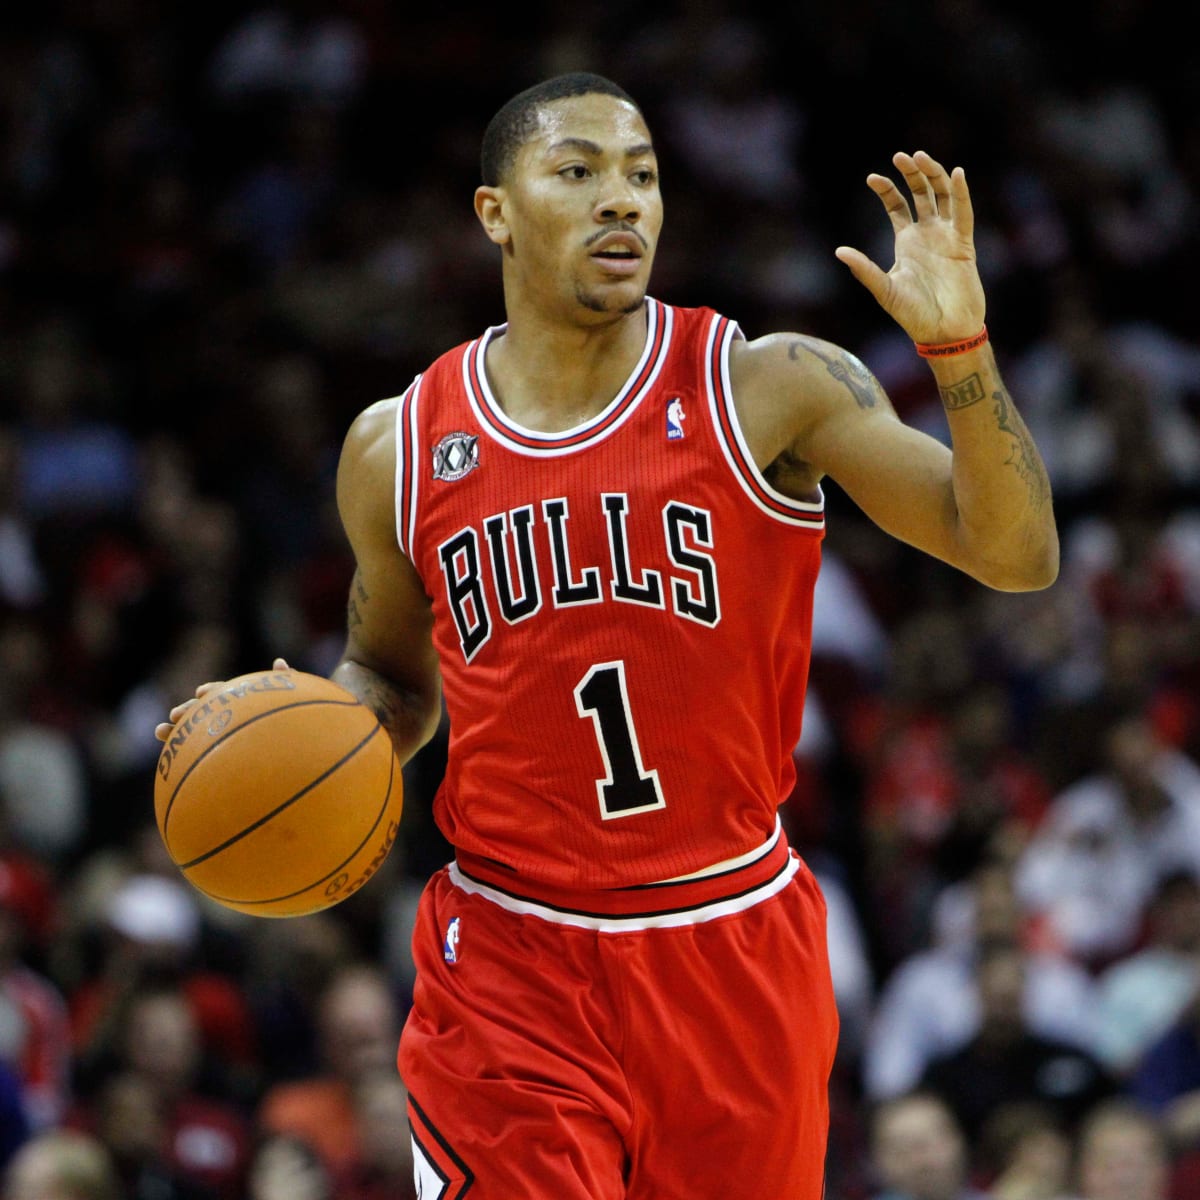 Derrick Rose's Retro Adidas Shoes are Back - Sports Illustrated